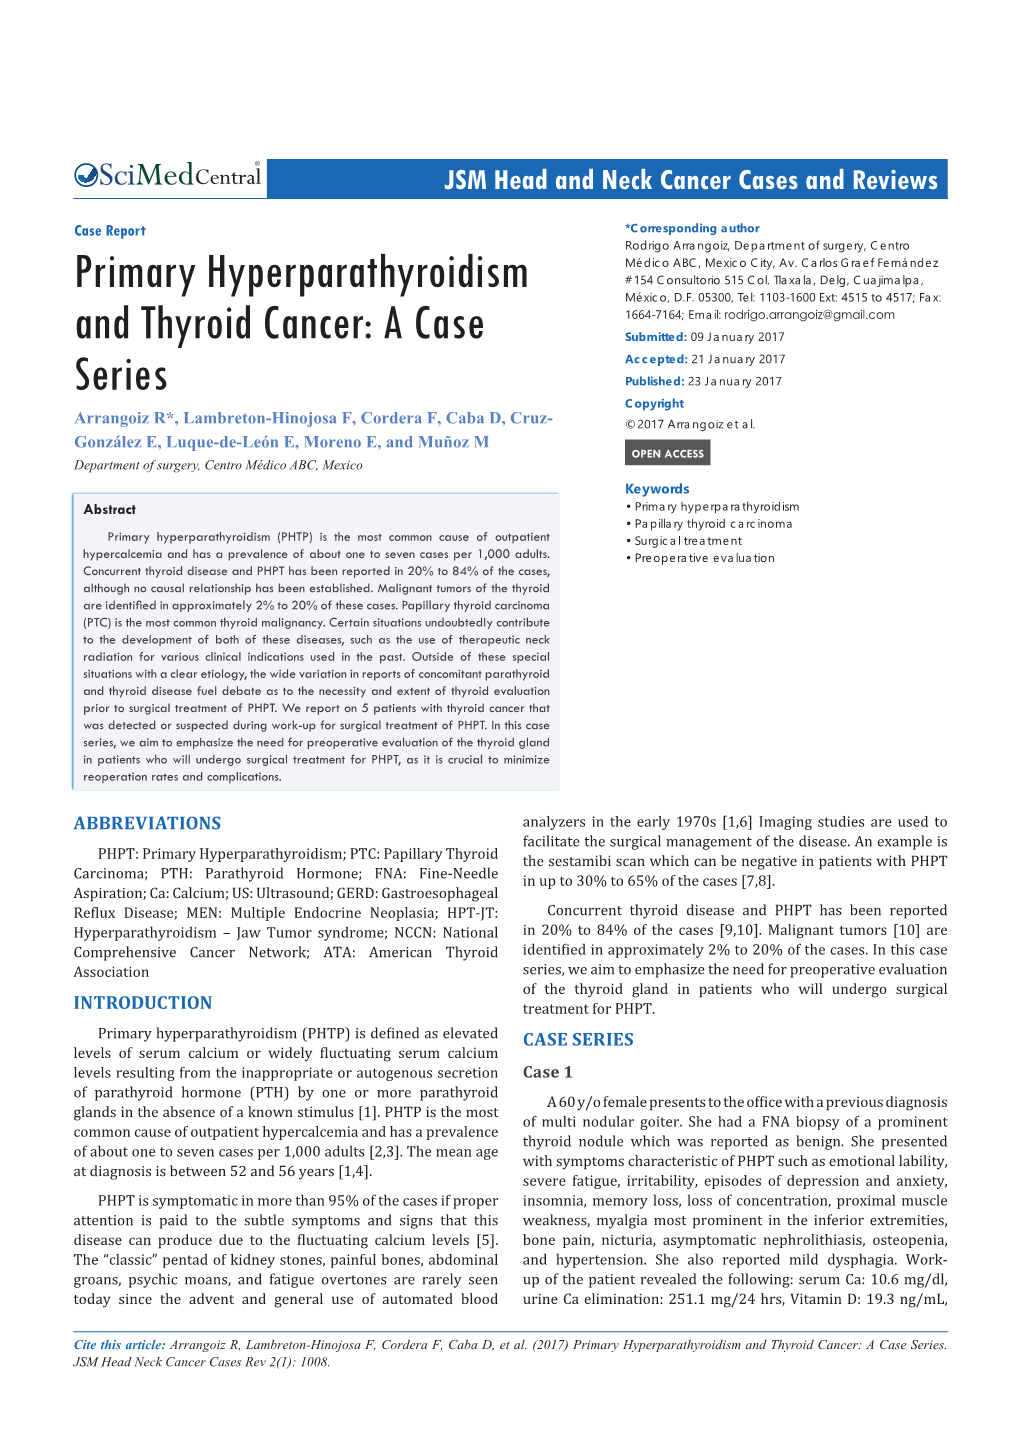 Primary Hyperparathyroidism and Thyroid Cancer: a Case Series